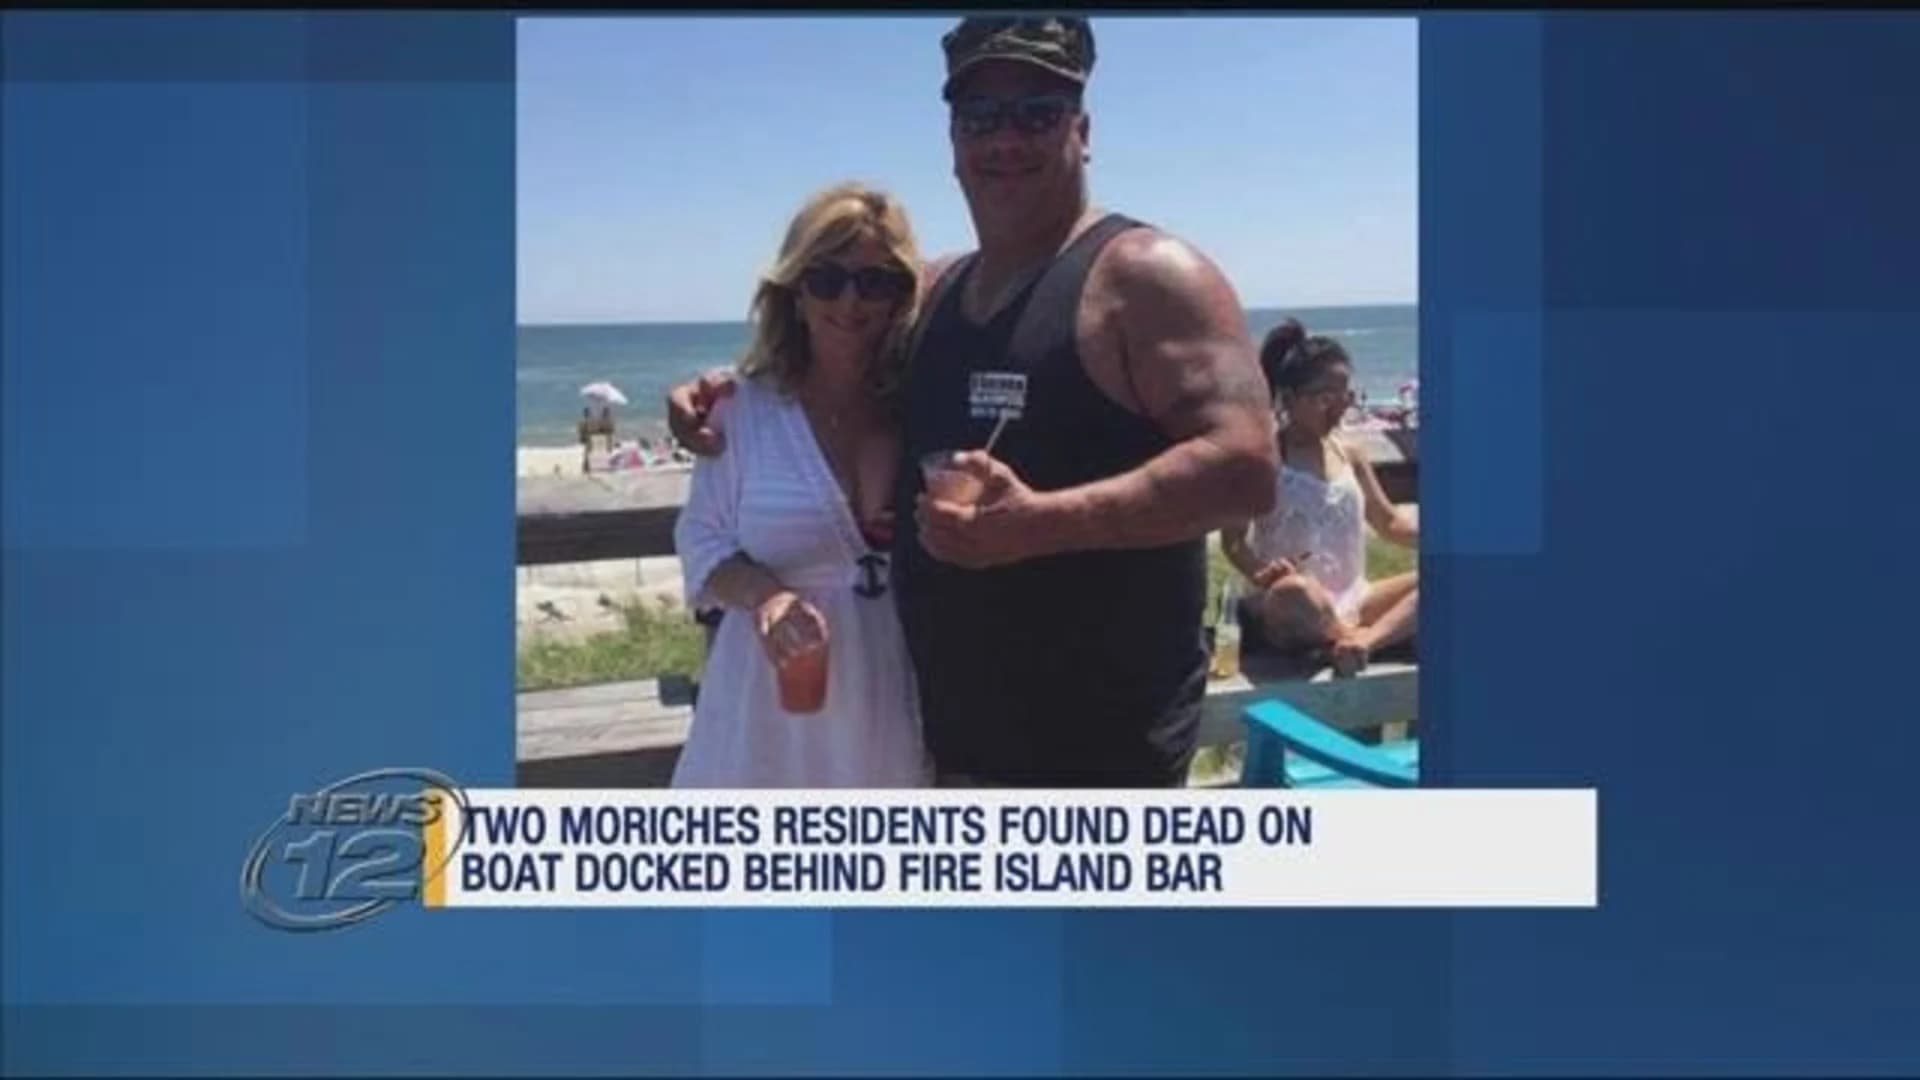 Police: 2 Moriches residents found dead on boat docked on Fire Island